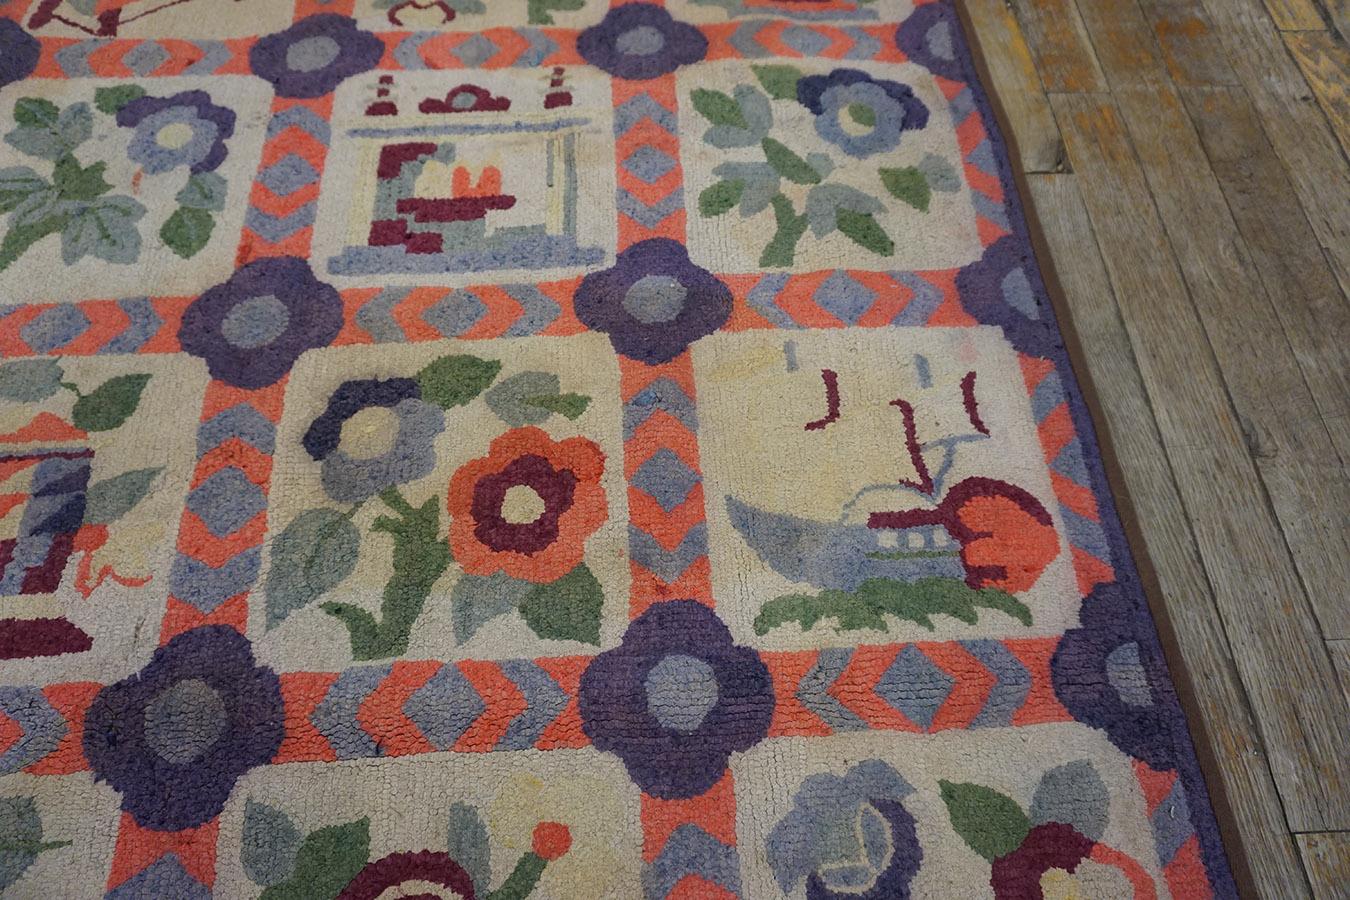 Early 20th Century American Hooked Rug ( 3'9'' x 5'7'' - 114 x 170 ) For Sale 1